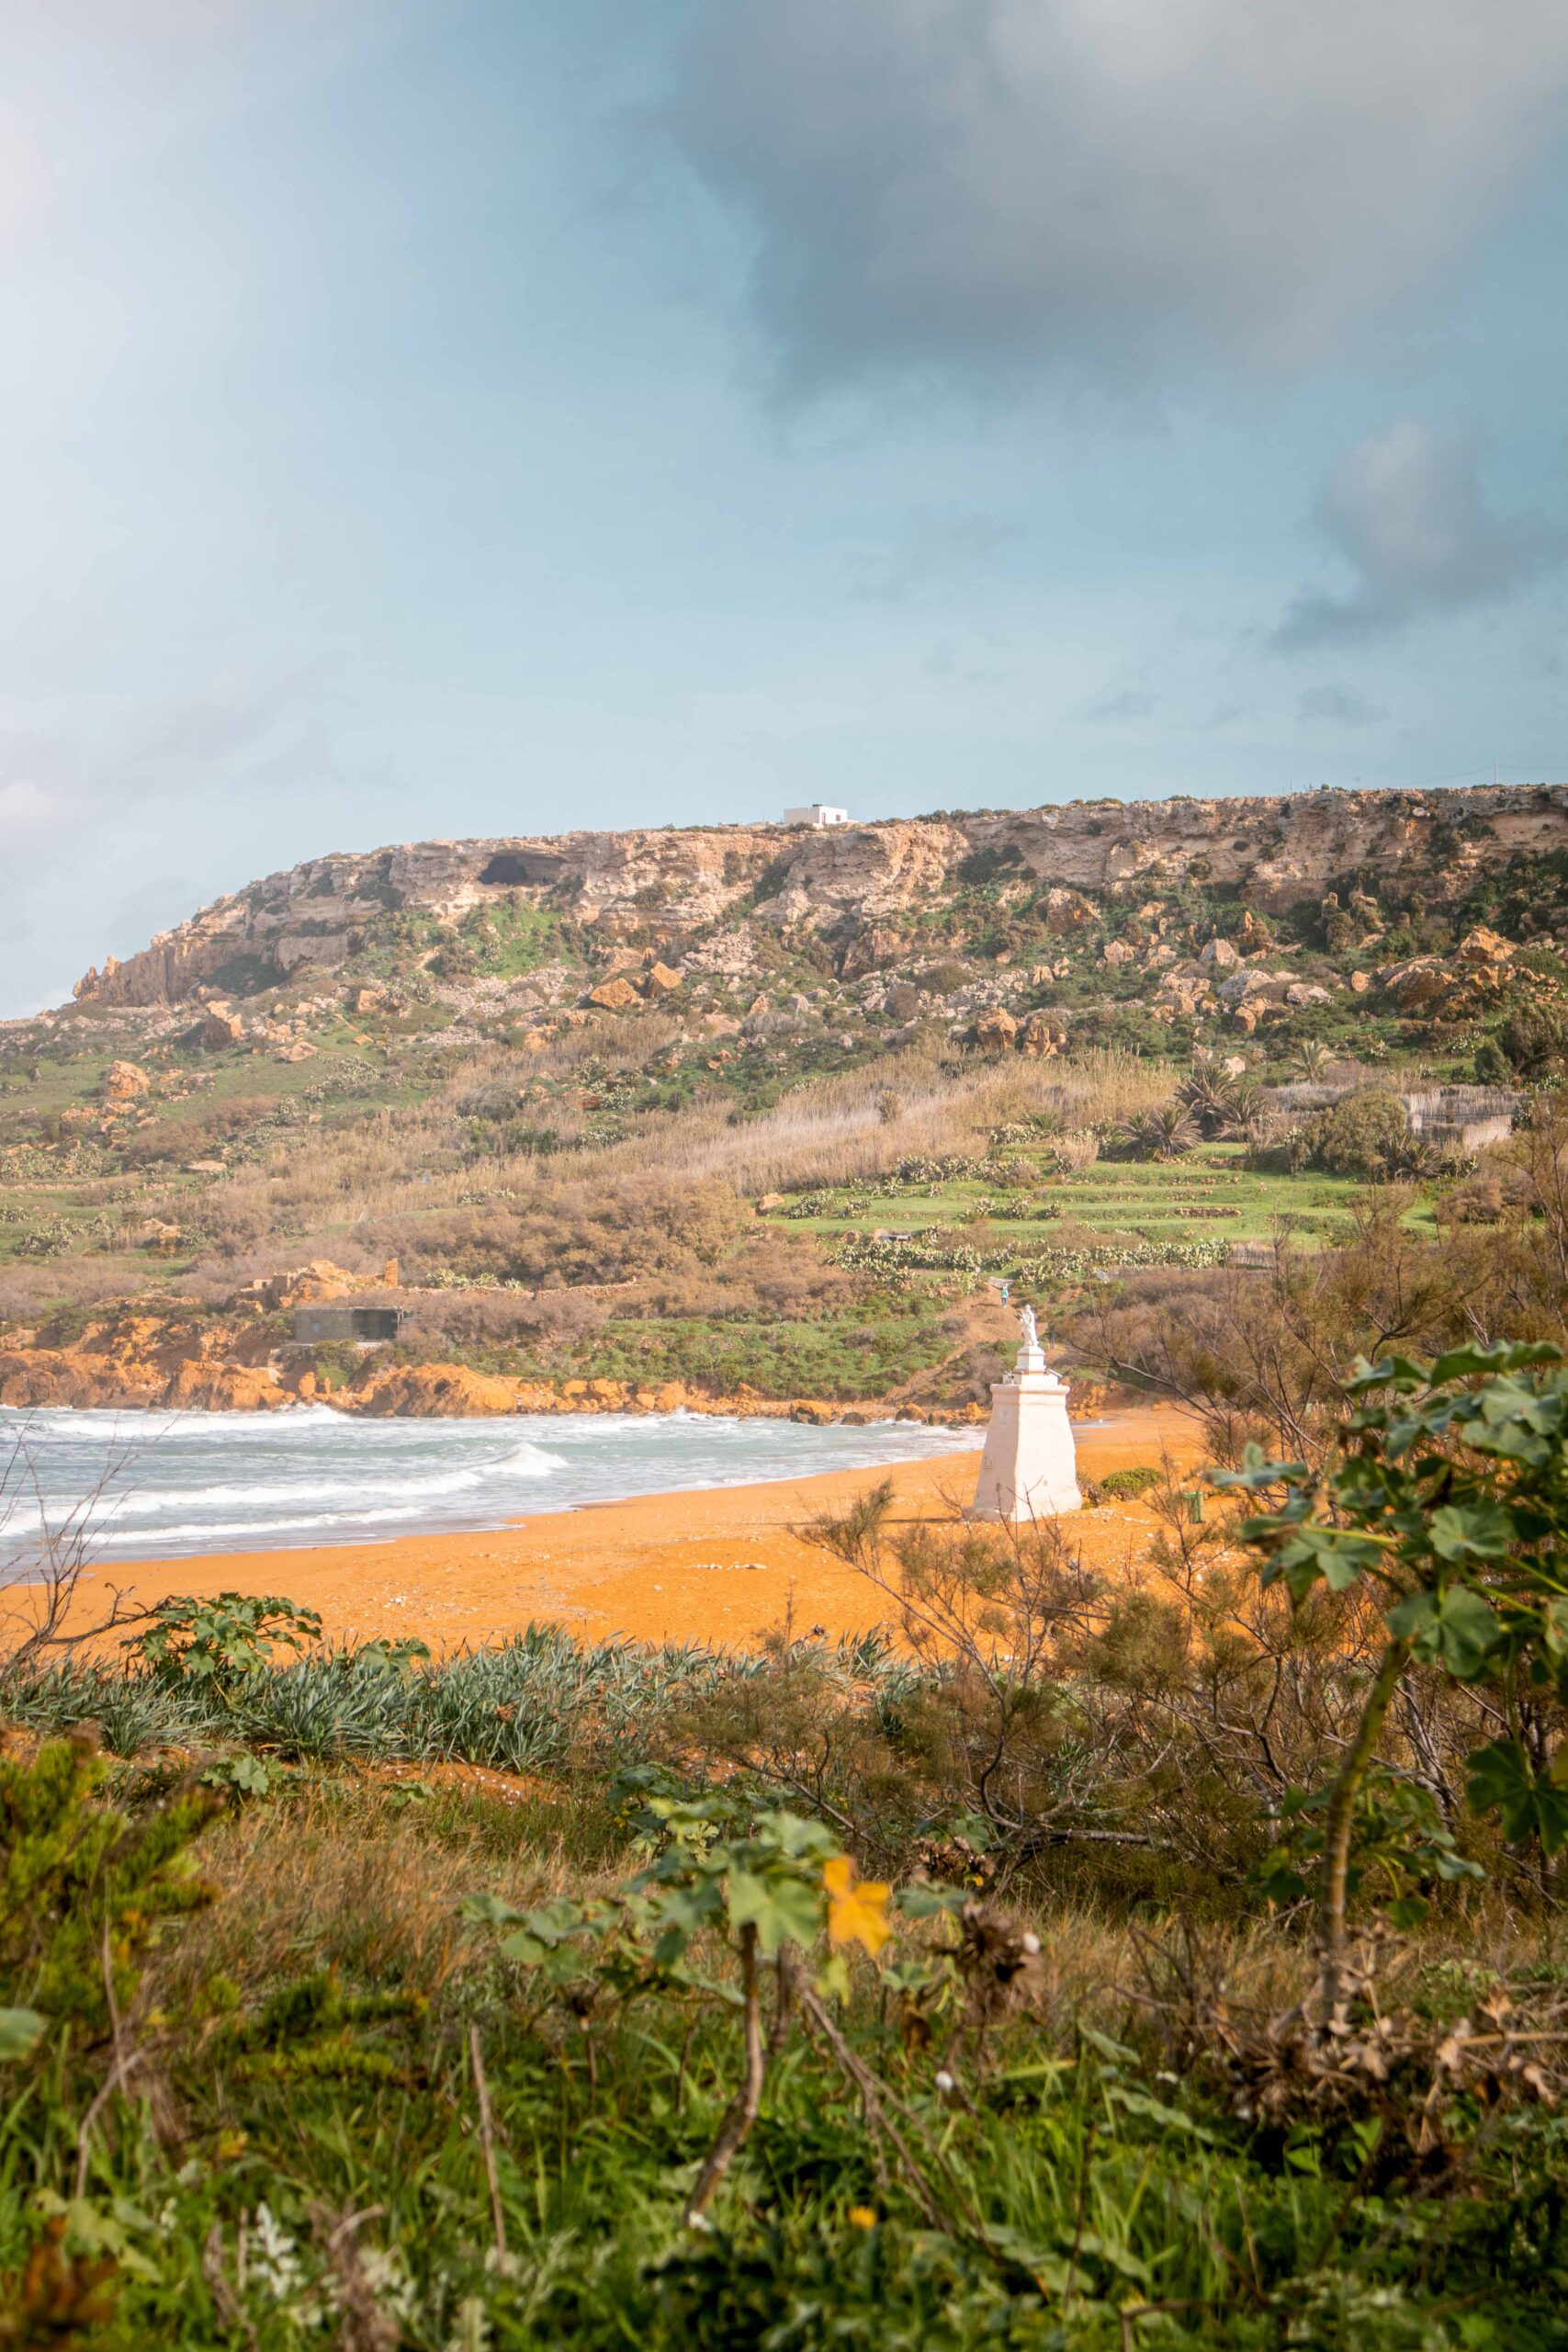 View of Ramla Bay Beach on Gozo island, Malta featuring orange-red sand, statue of Our Lady of Hope and Tal-Mixta Cave